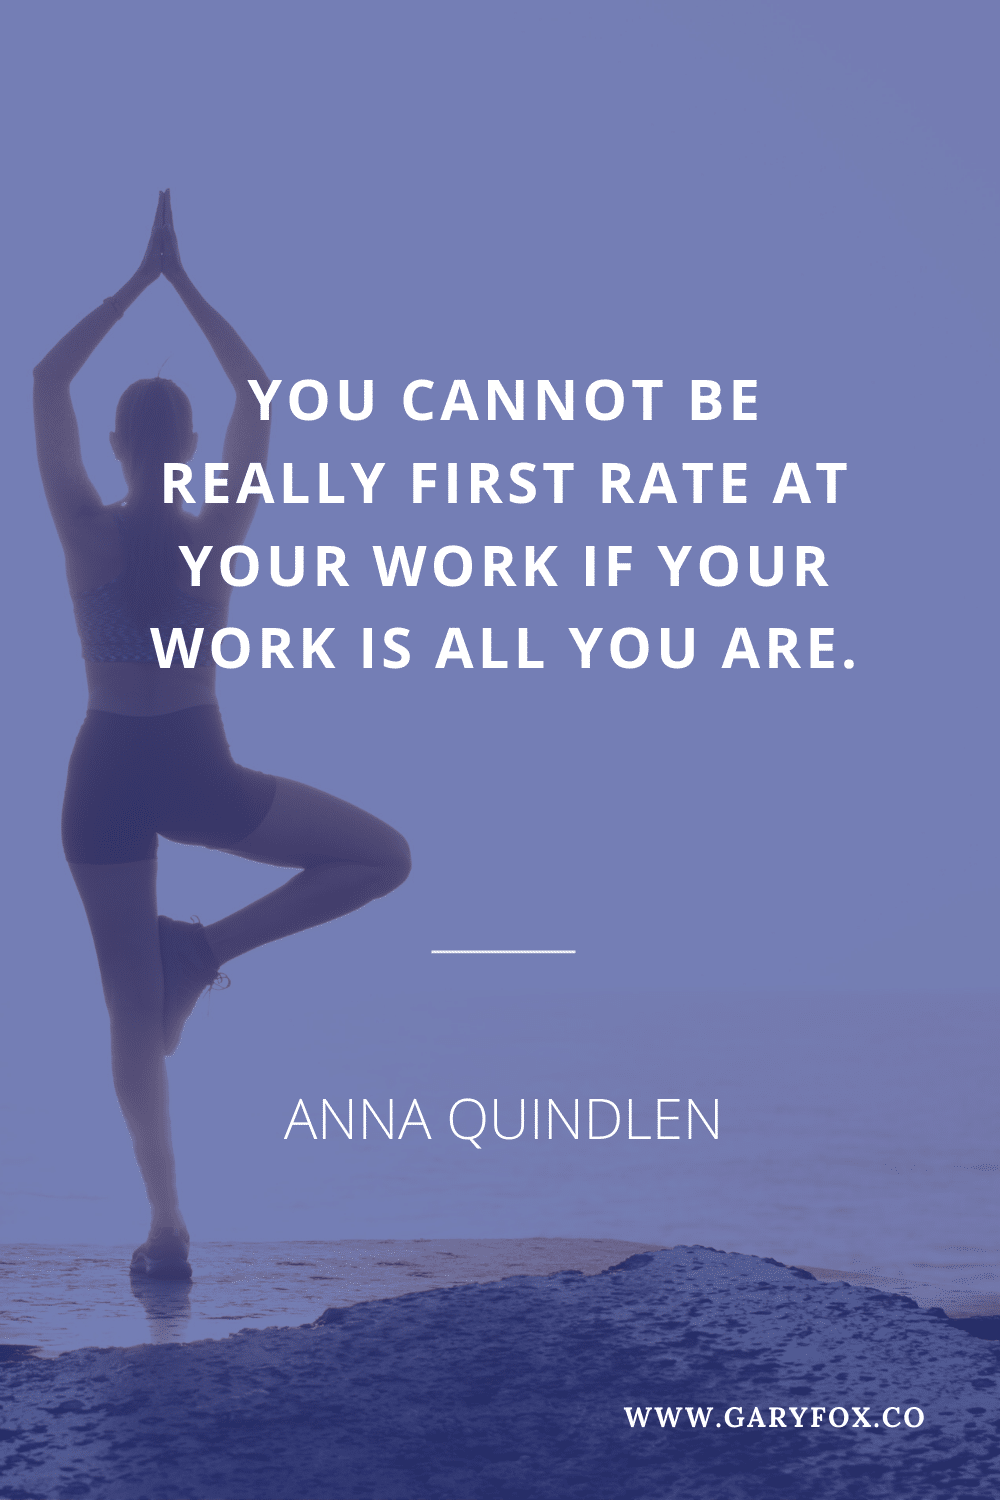 You Cannot Be Really First Rate At Your Work If Your Work Is All You Are. - Anna Quindlen